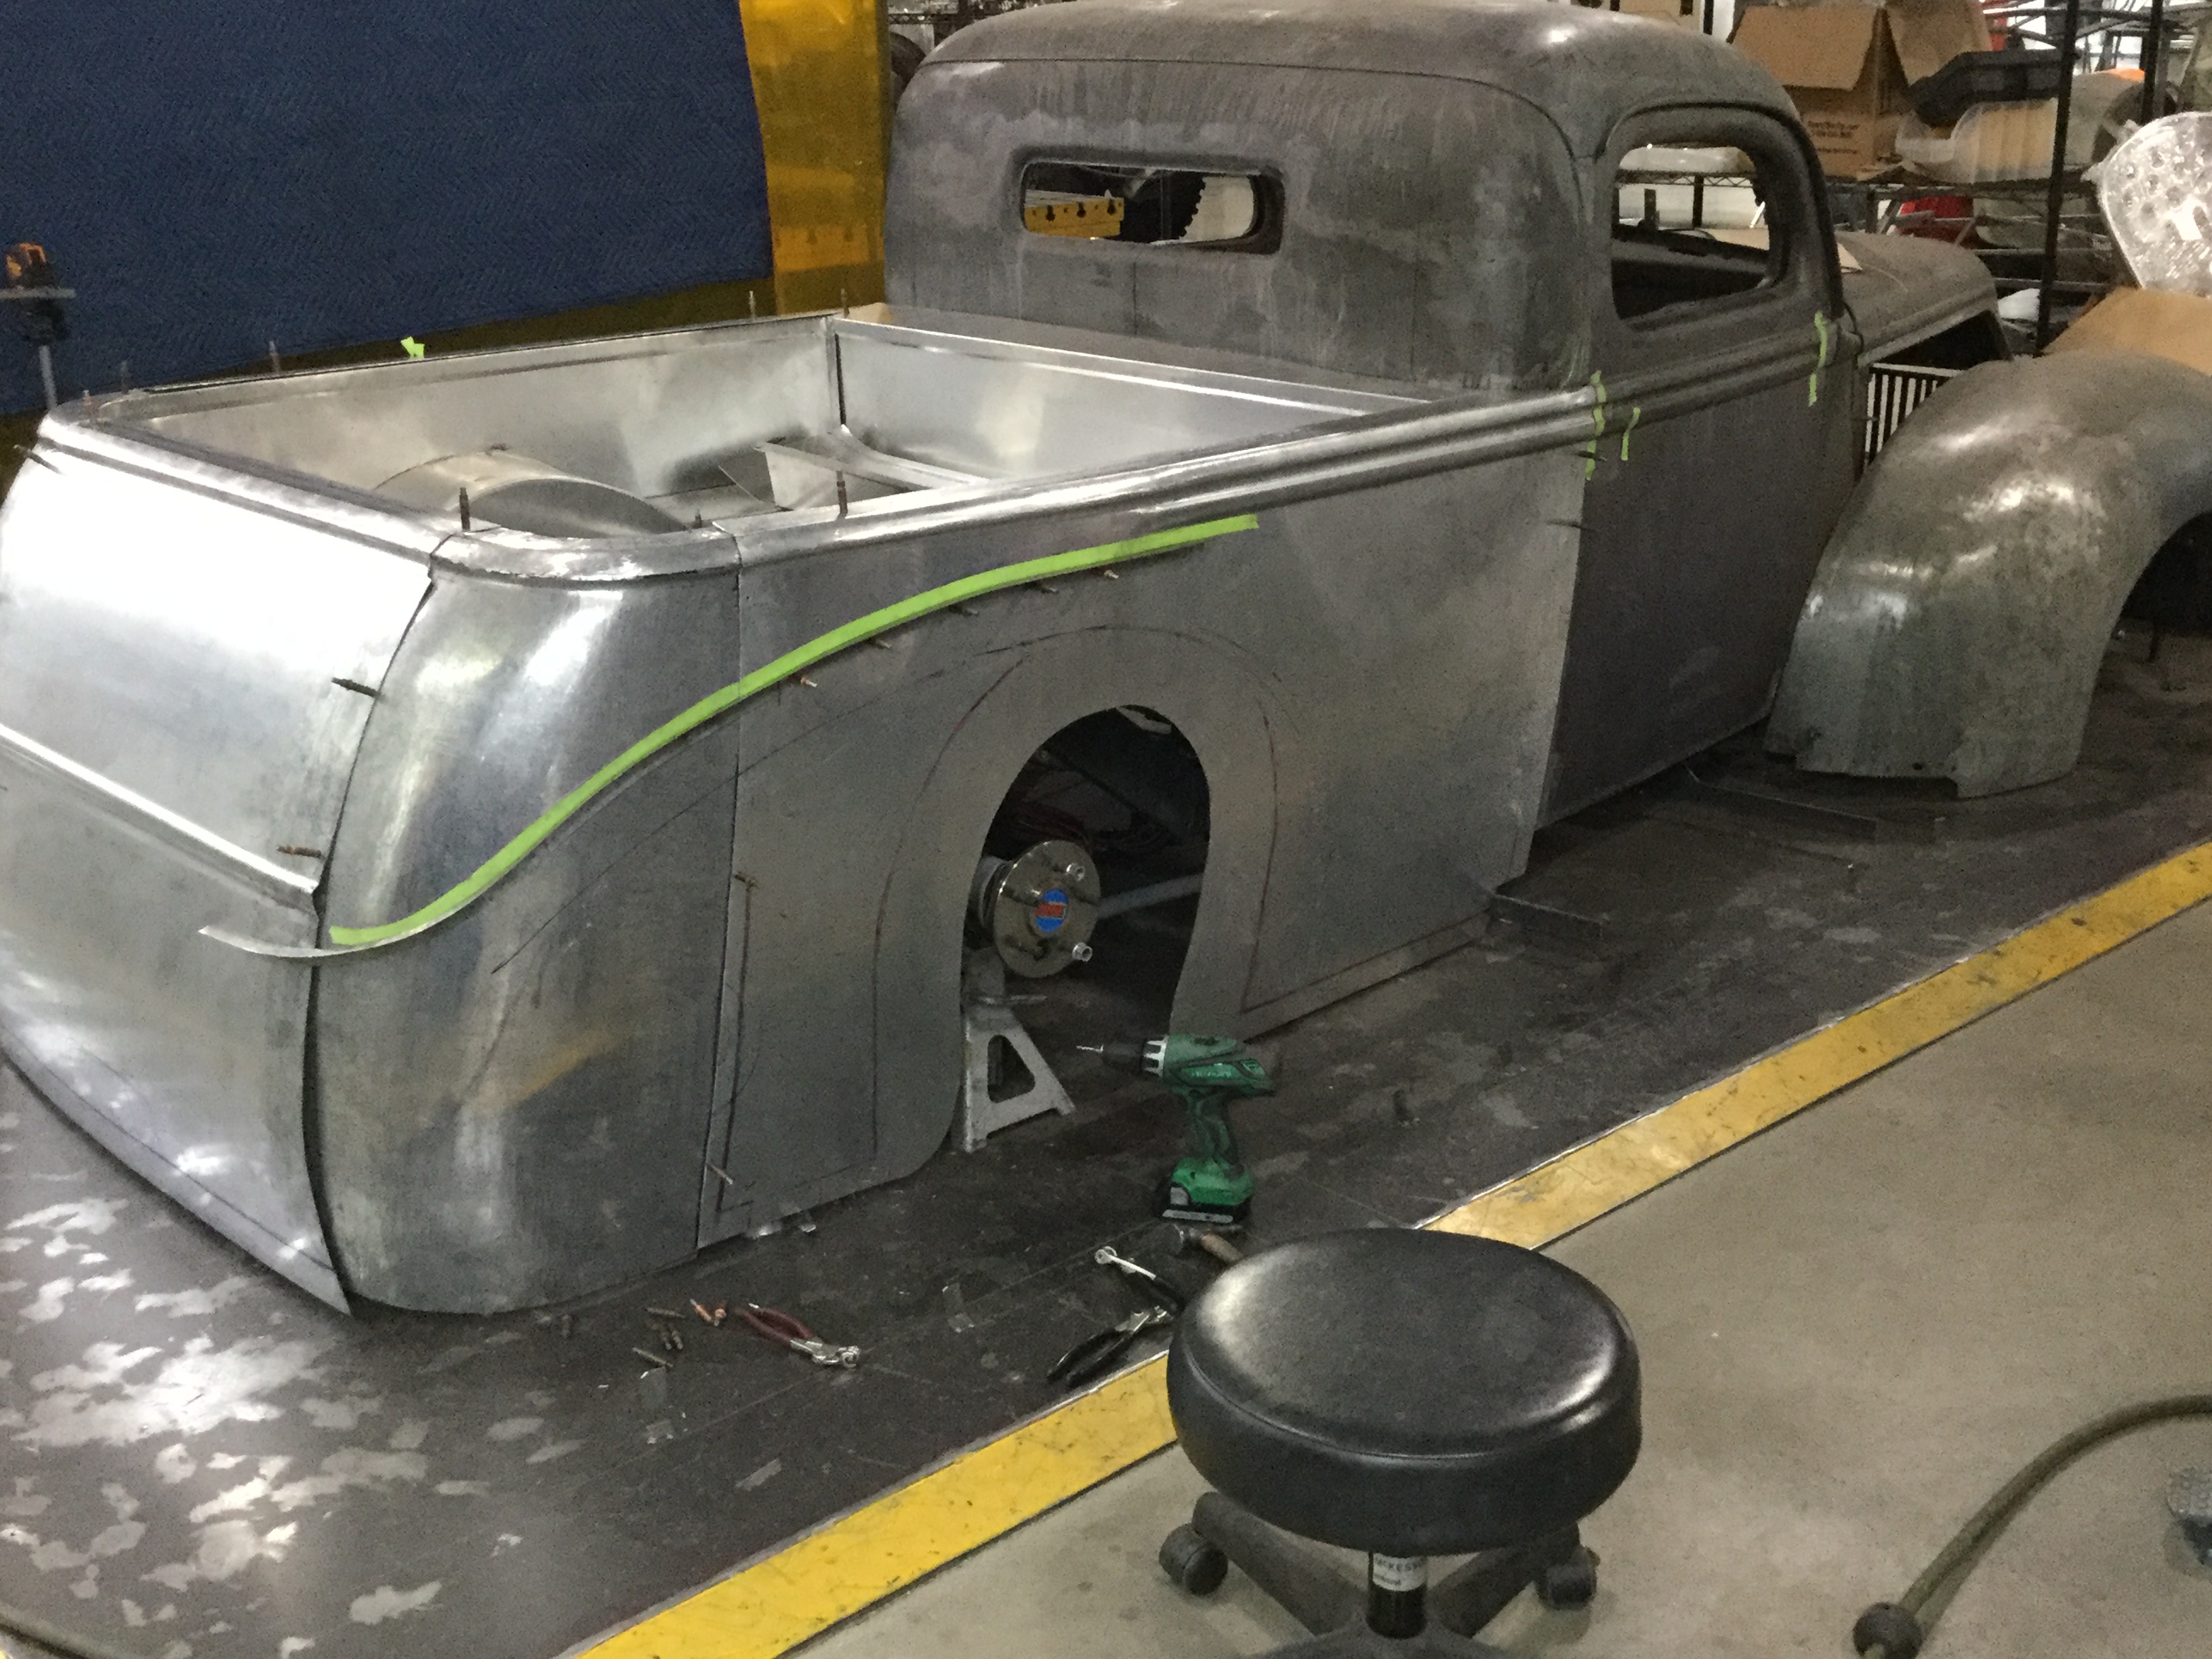 Completed bodywork on 1937 Zephyr Coupe